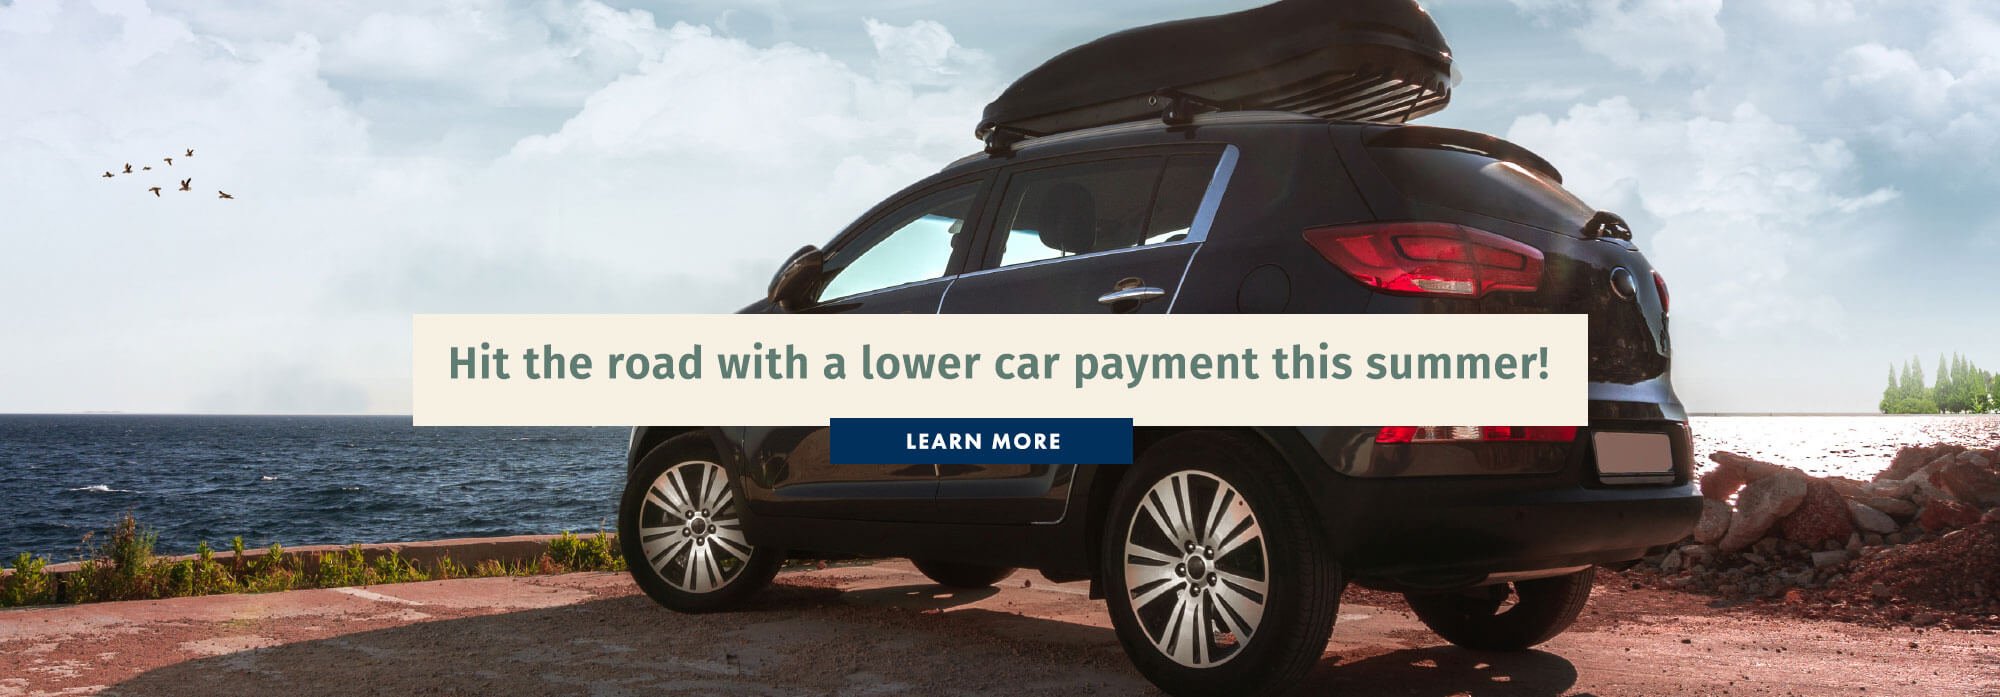 Hit the road with a lower car payment this summer!